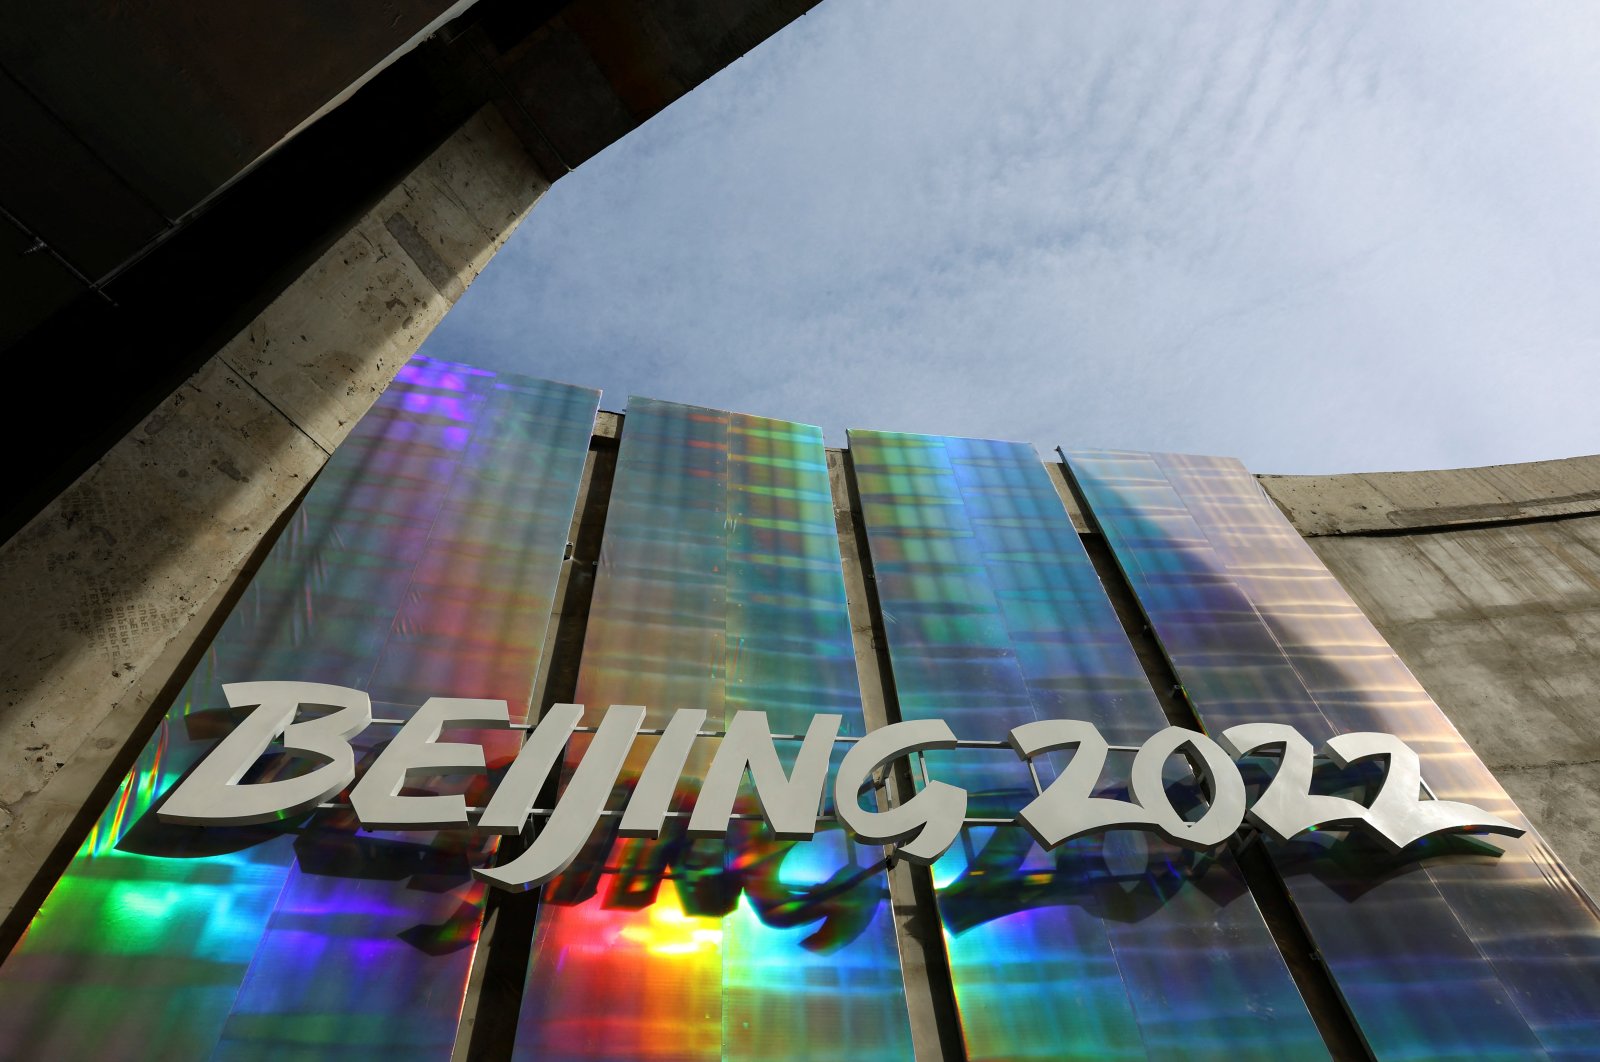 A Beijing 2022 Winter Olympics logo is pictured at the Main Press Centre, Beijing, China, Jan. 8, 2022. (Reuters Photo)